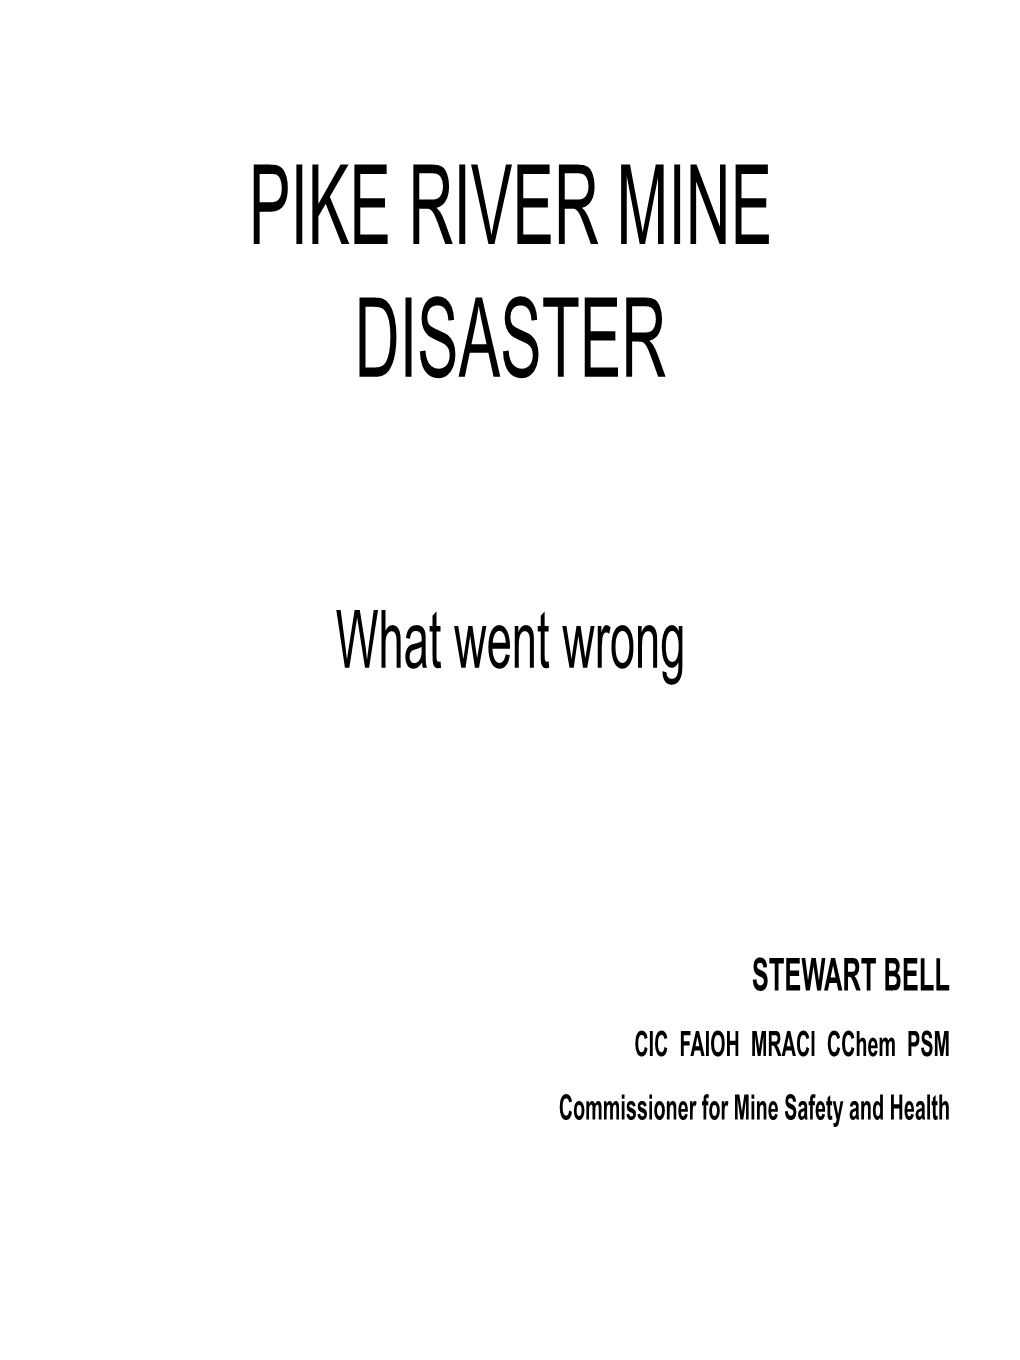 Pike River Mine Disaster